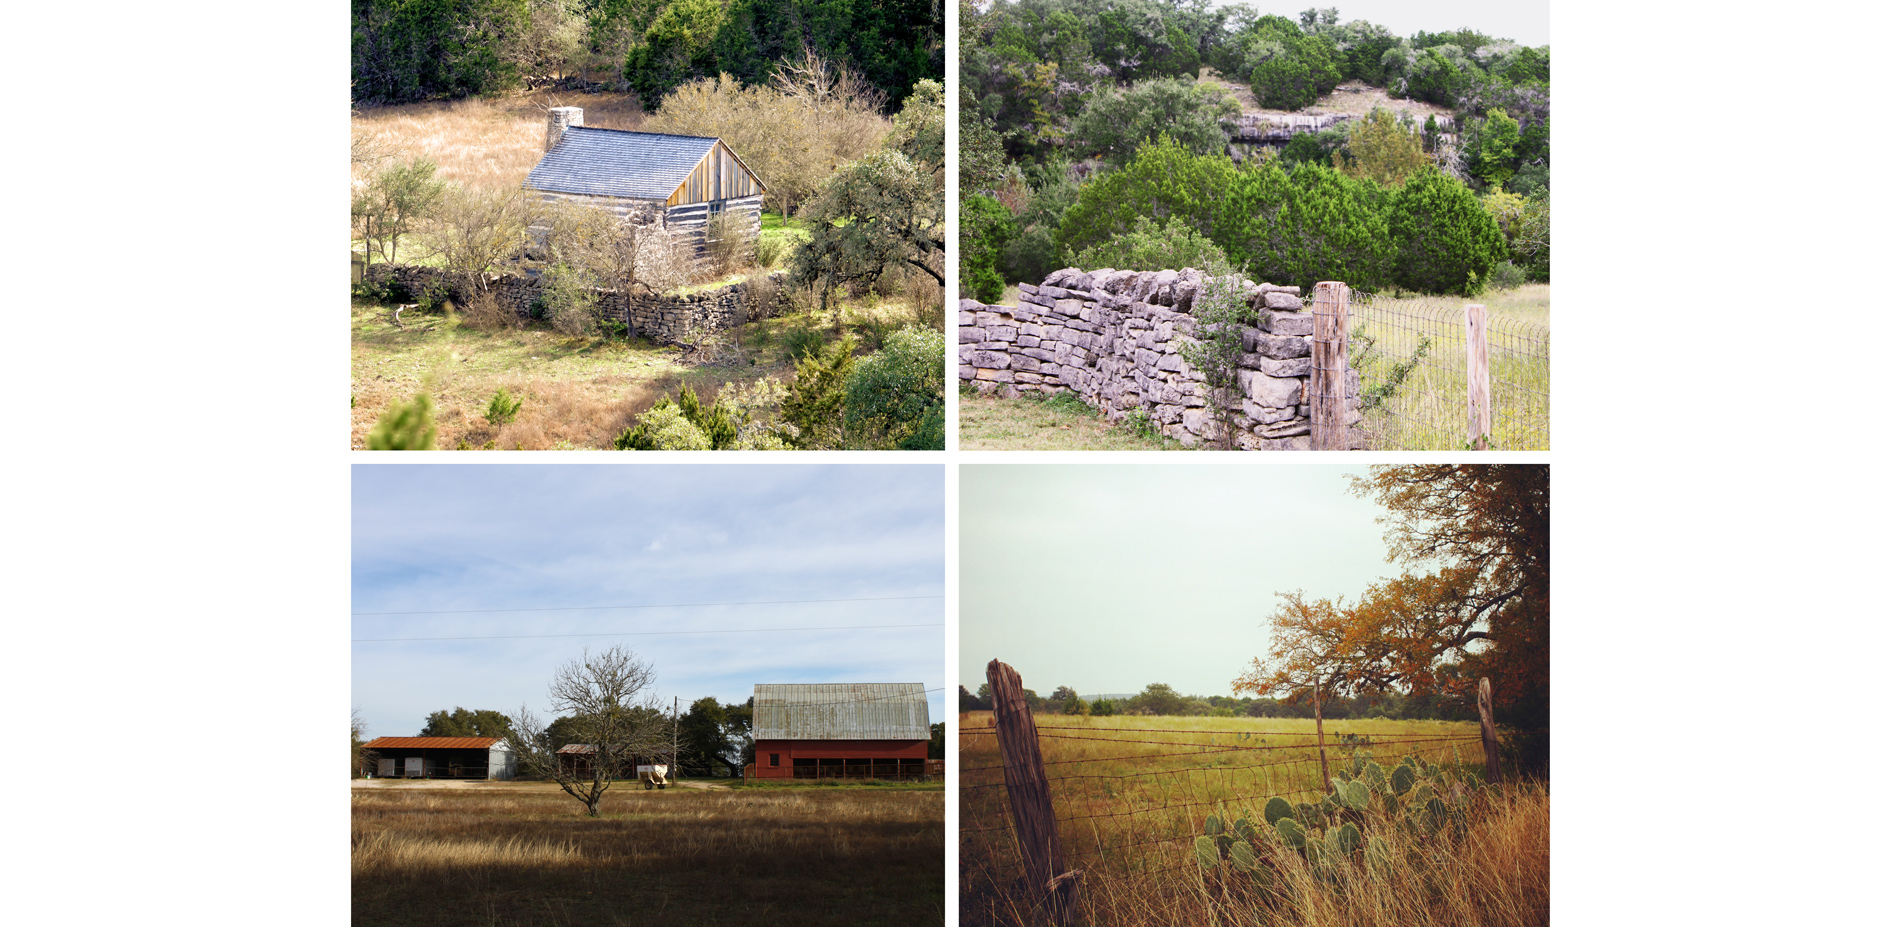 Shield Ranch offers a vanishing narrative of the Texas Hill Country’s cultural and natural history. A GIS-based database of these resources was critic…